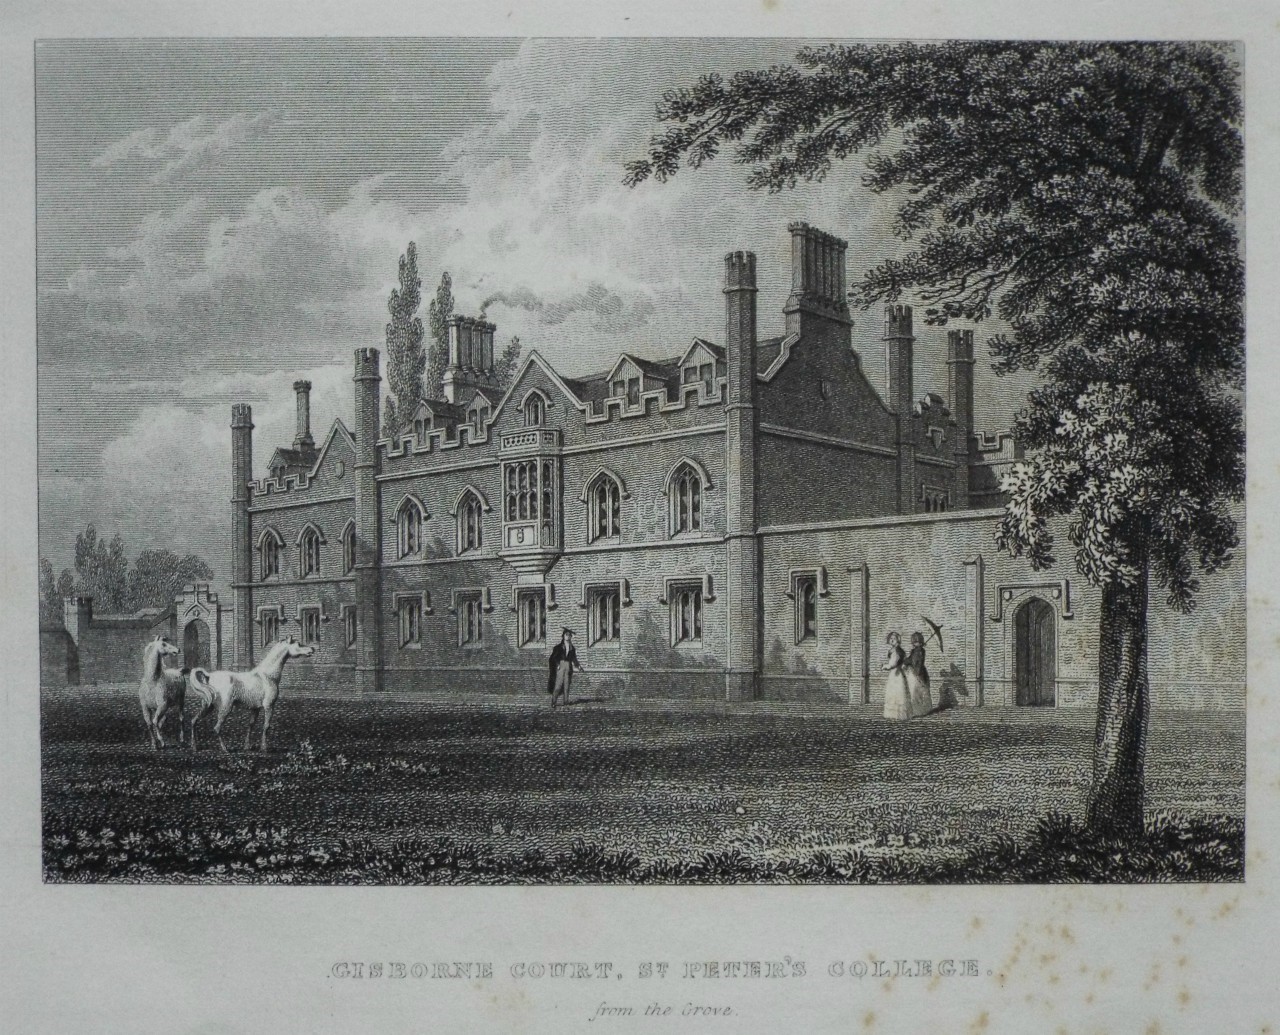 Print - Gisborne Court, St. Peter's College, from the Grove.